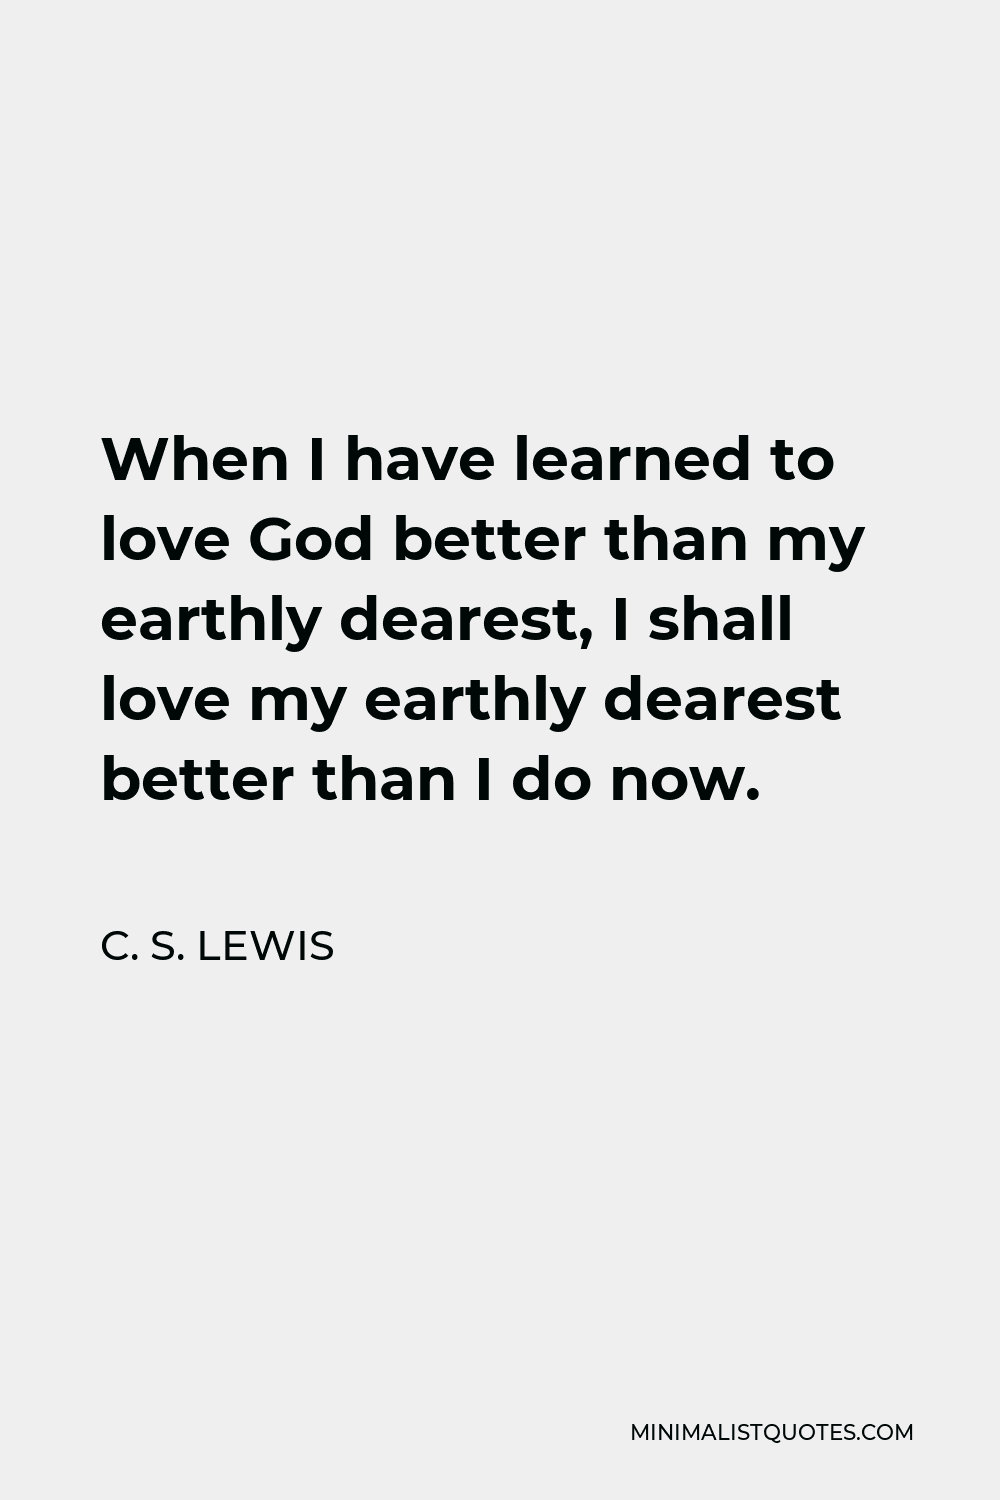 C. S. Lewis Quote - When I have learned to love God better than my earthly dearest, I shall love my earthly dearest better than I do now.